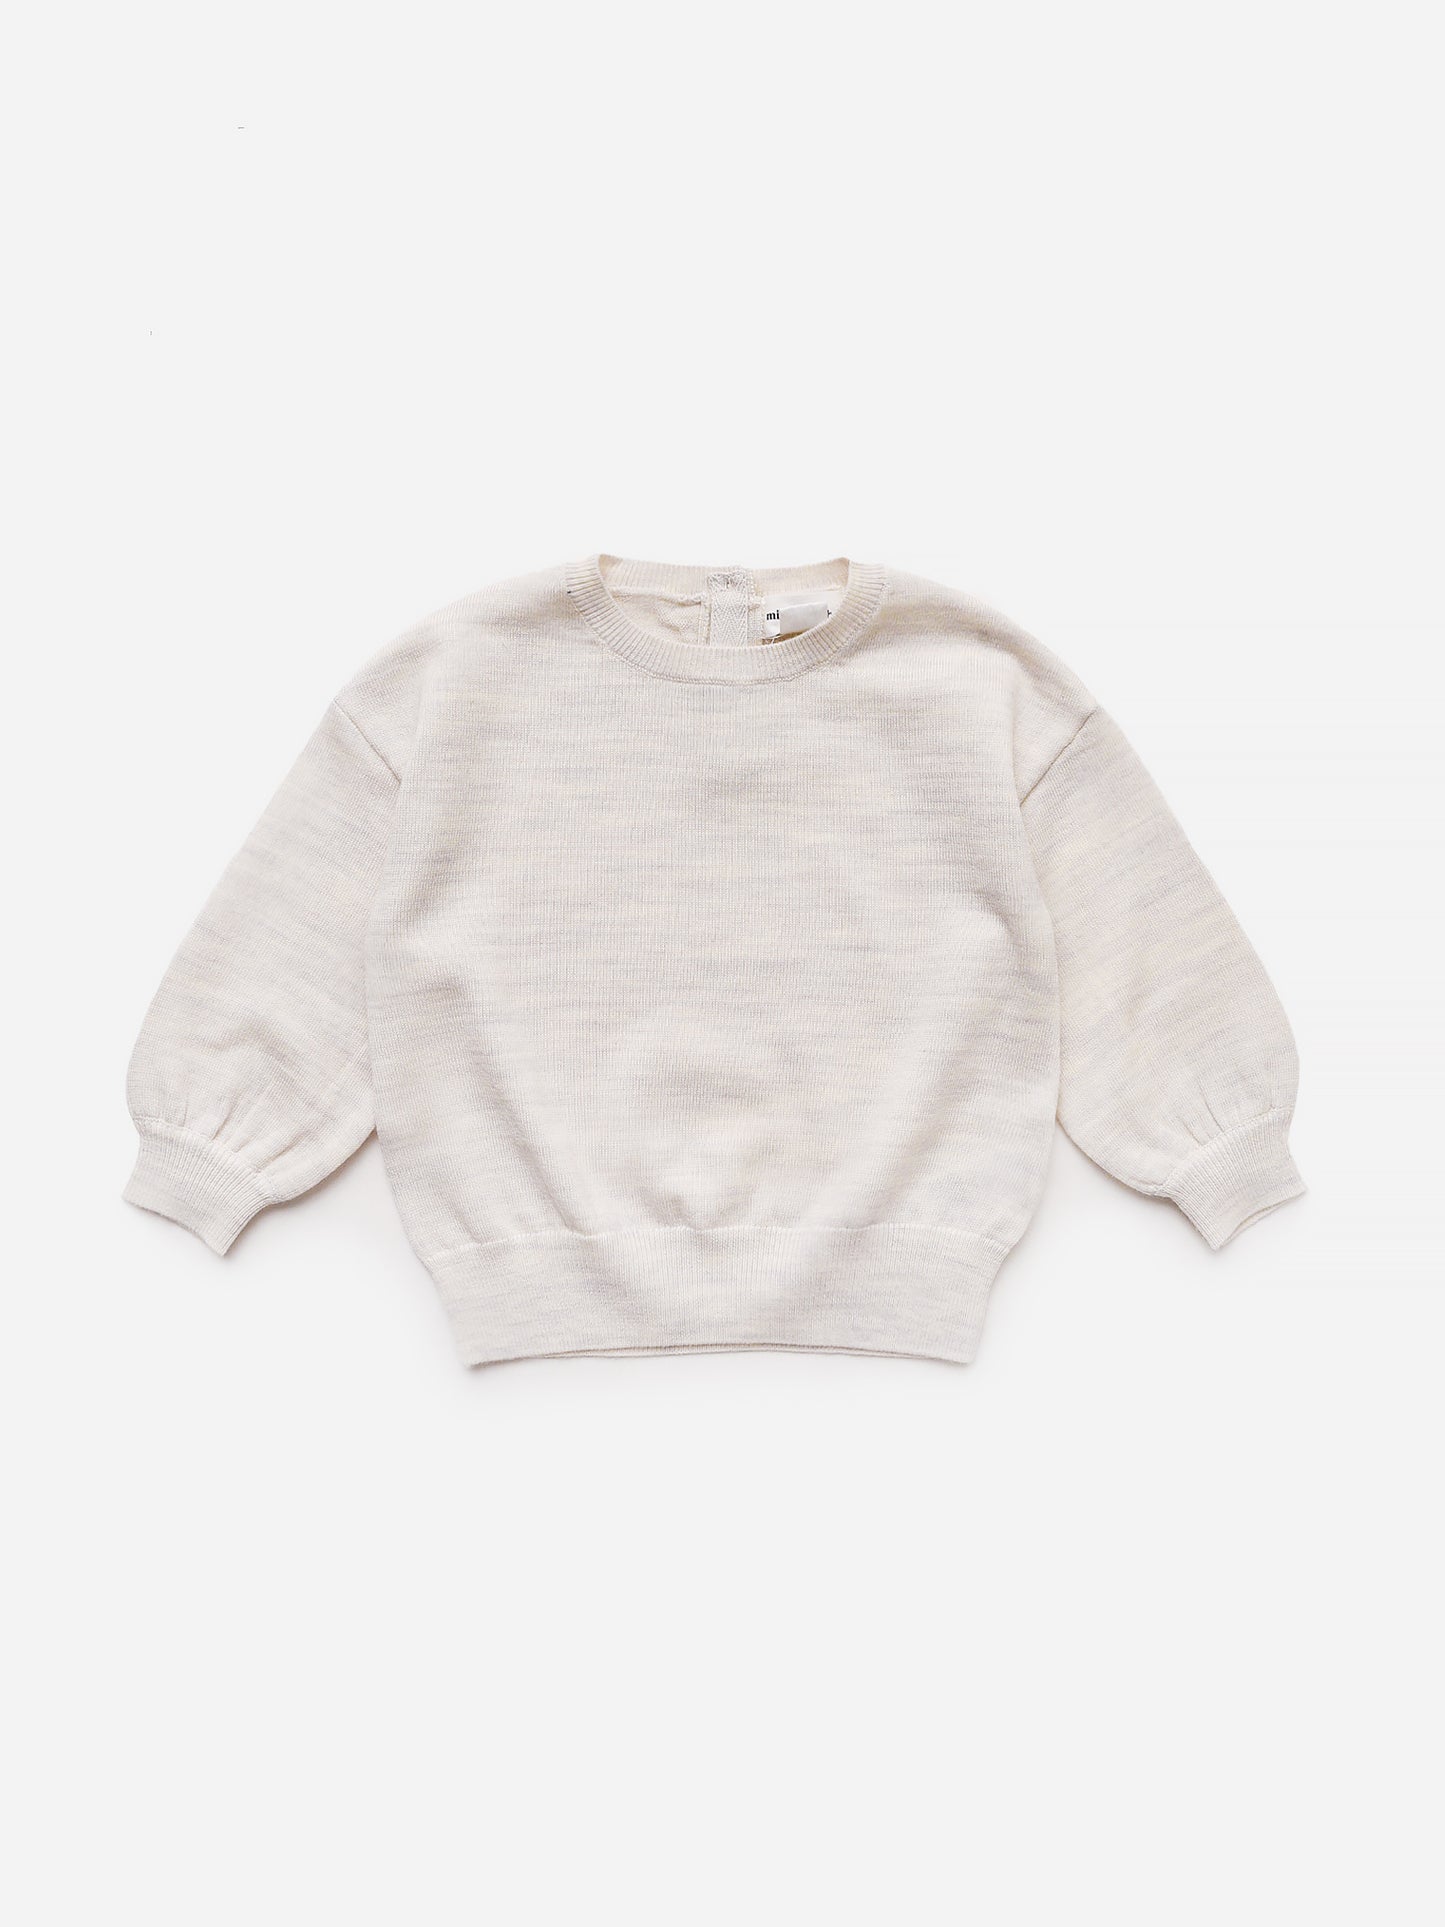 Miles Kids' Baby Knit Sweater